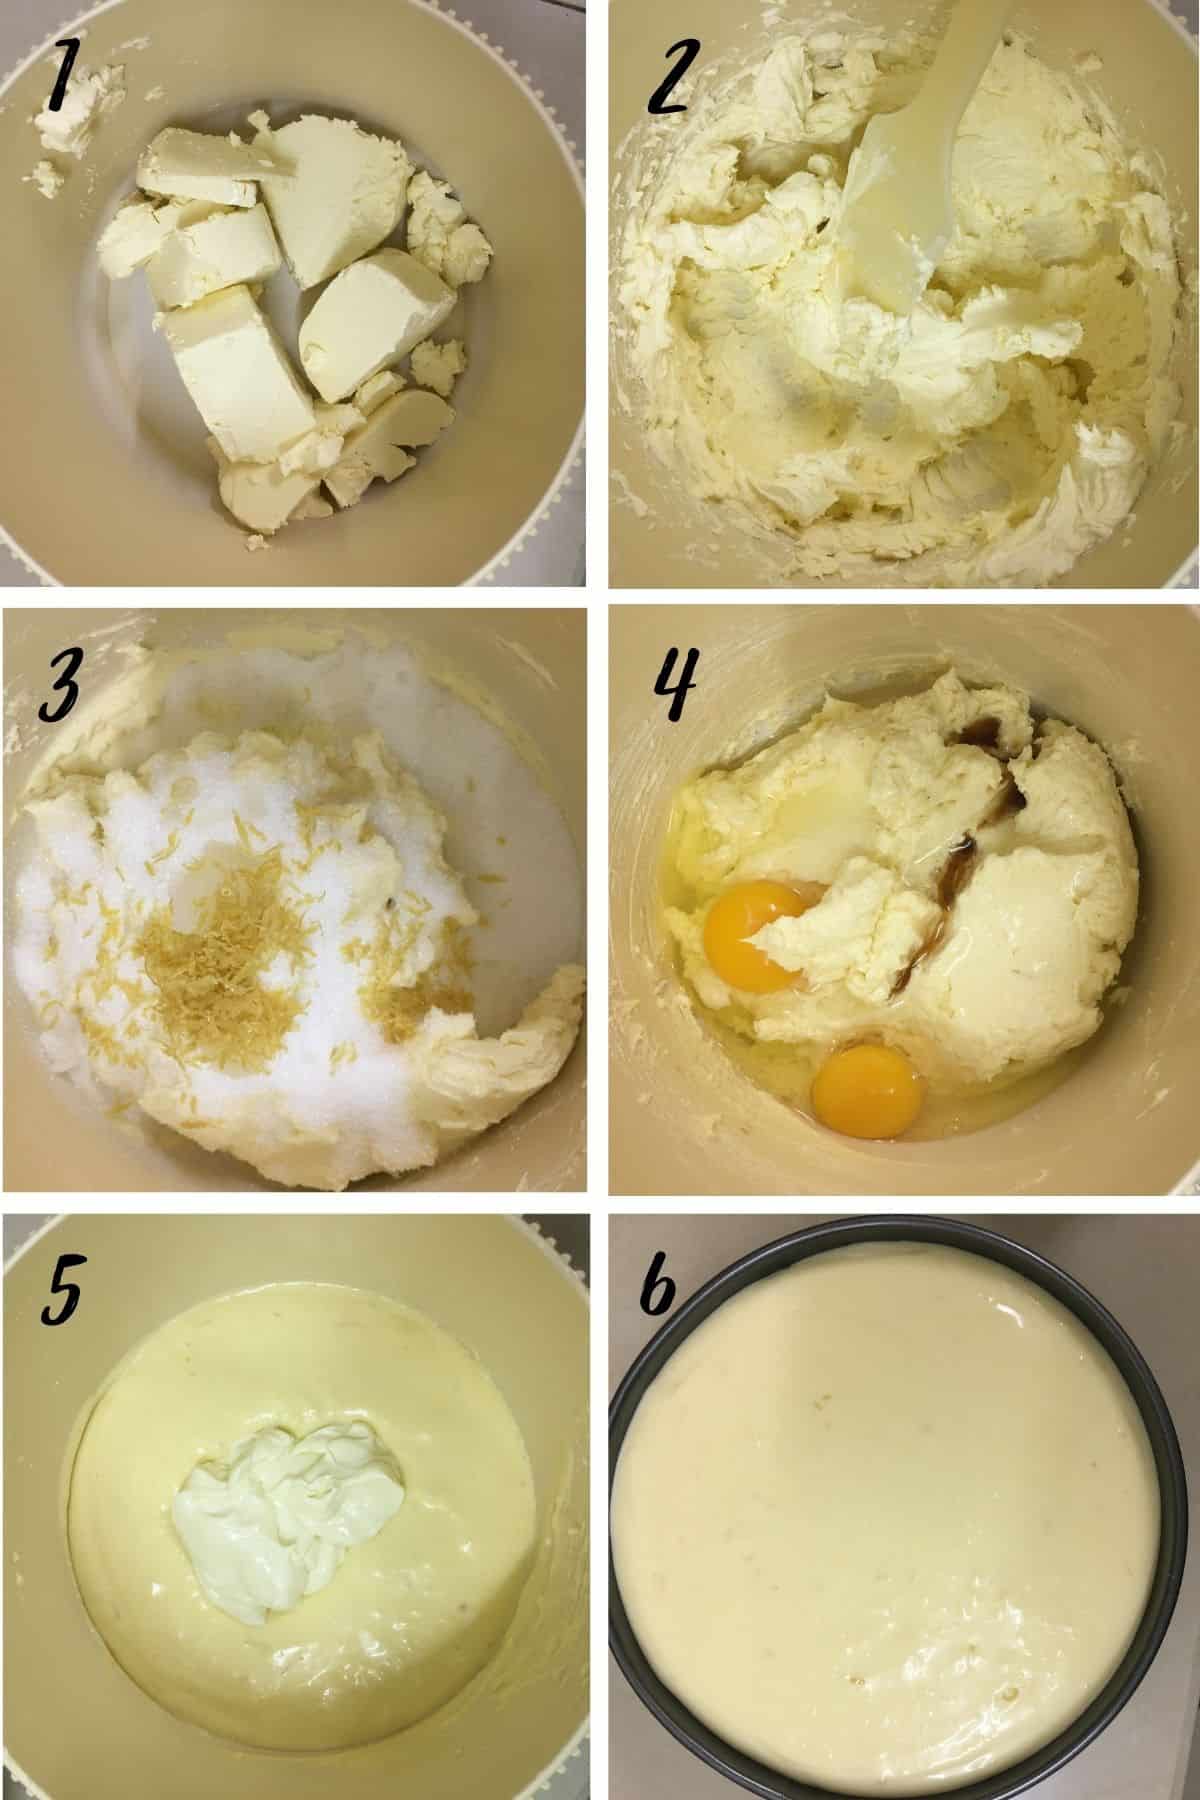 A poster of 6 images showing how to mix cheesecake batter